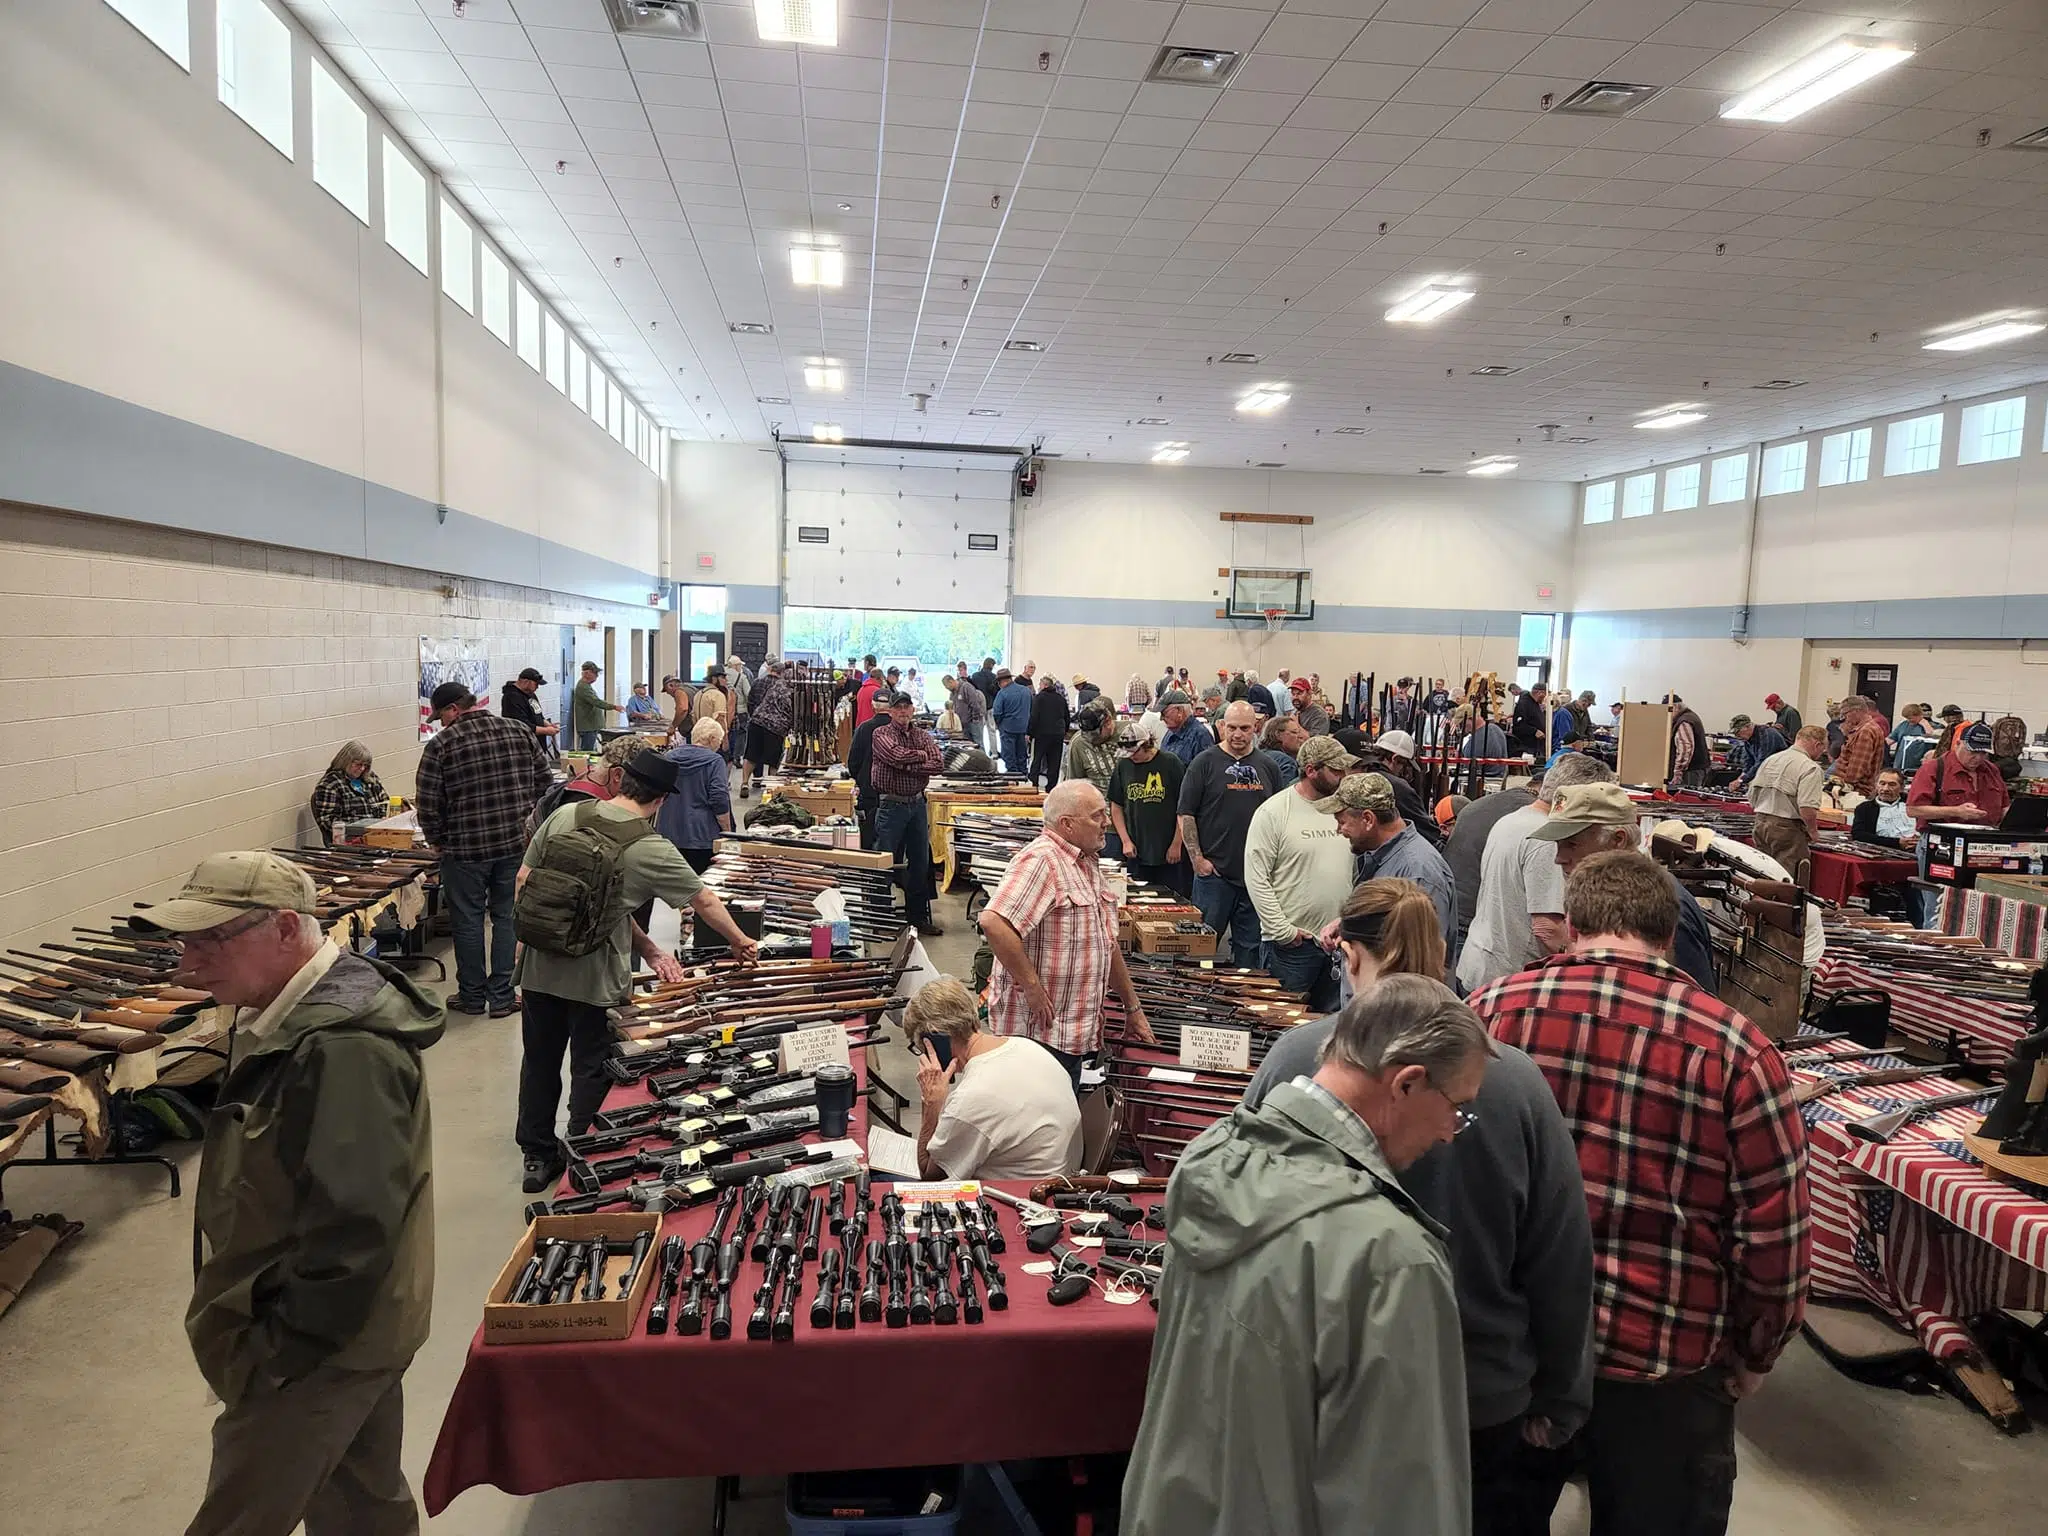 F ‘n’ A Gun & Sport Show coming to Detroit Lakes for First Time Lakes